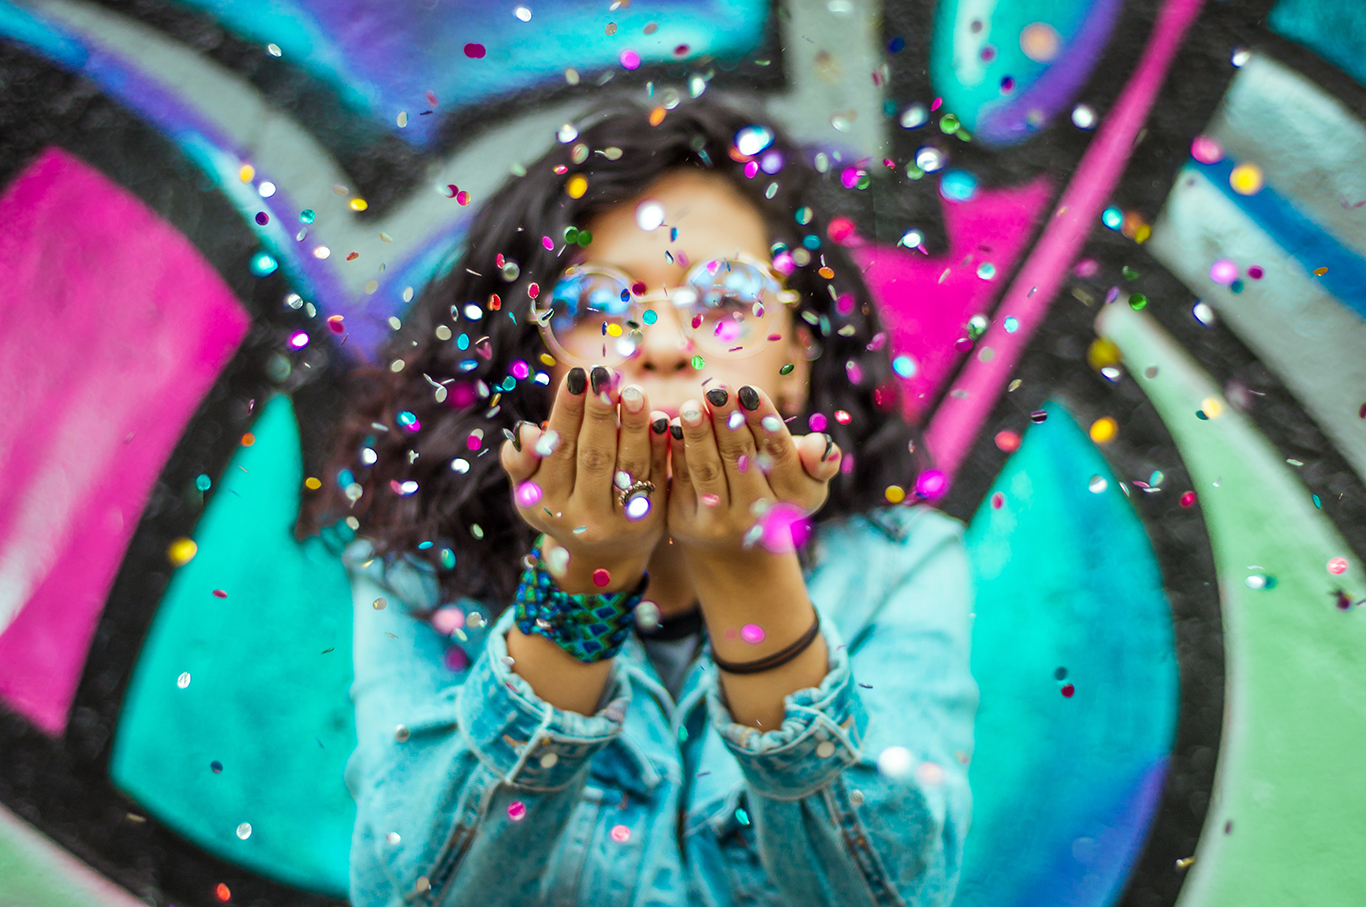 Photo of a person blowing confetti from her hands.